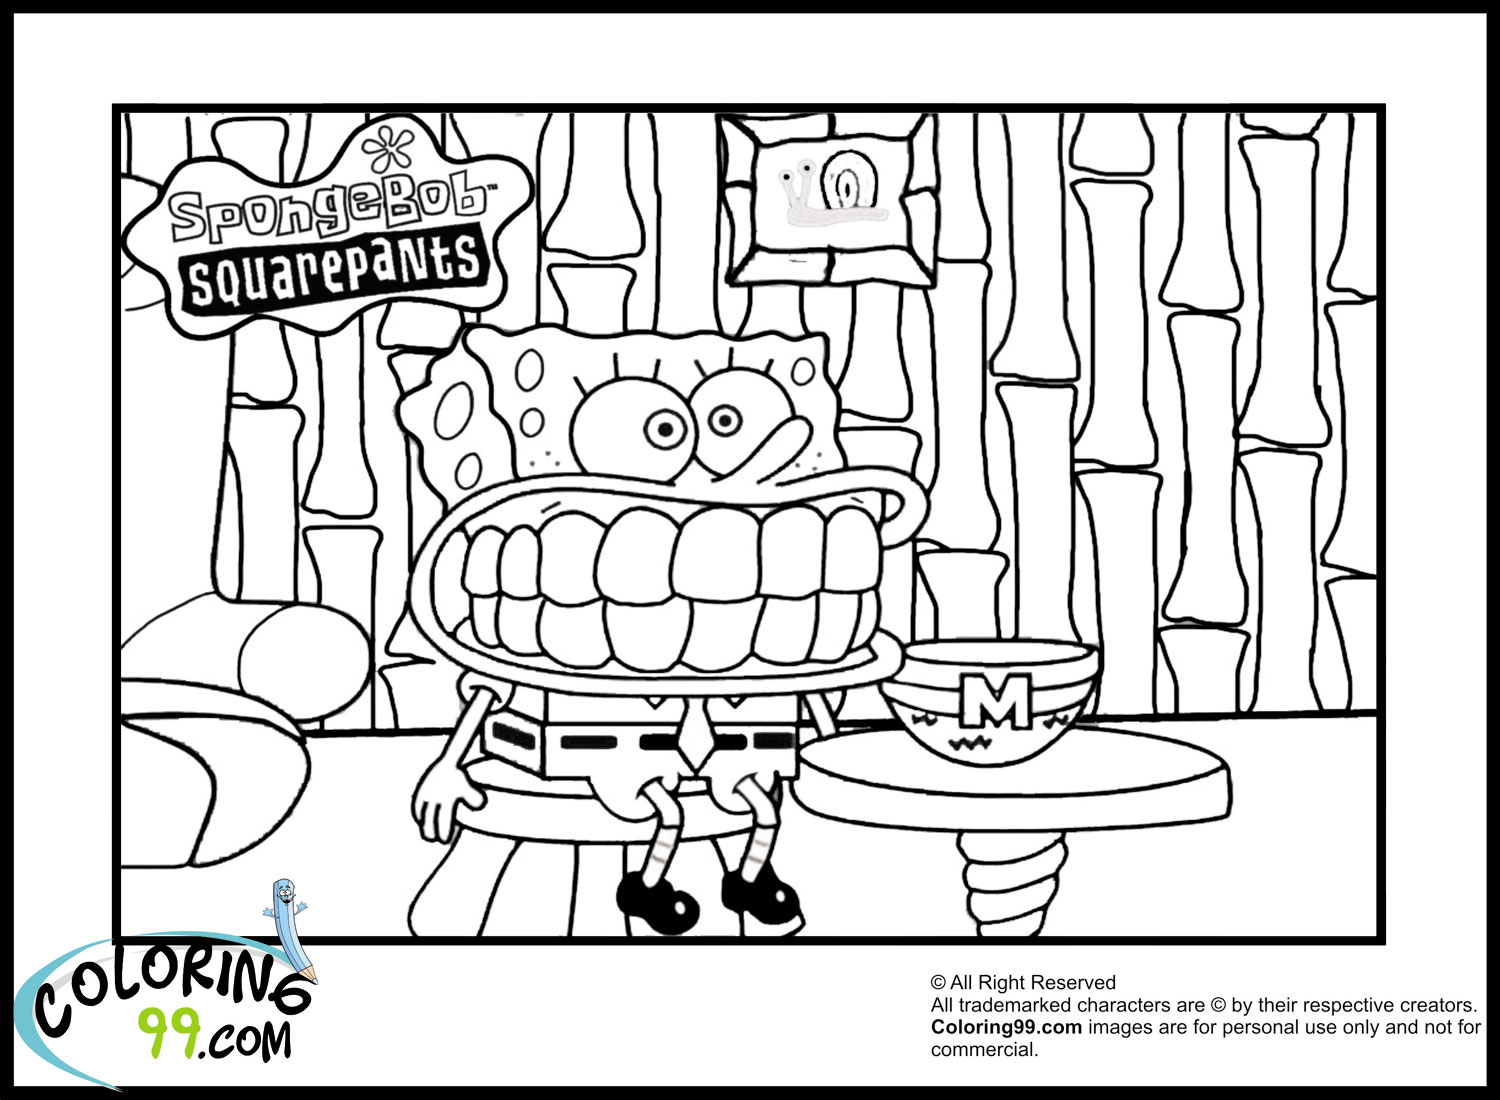 Spongebob Coloring Pages | Minister Coloring